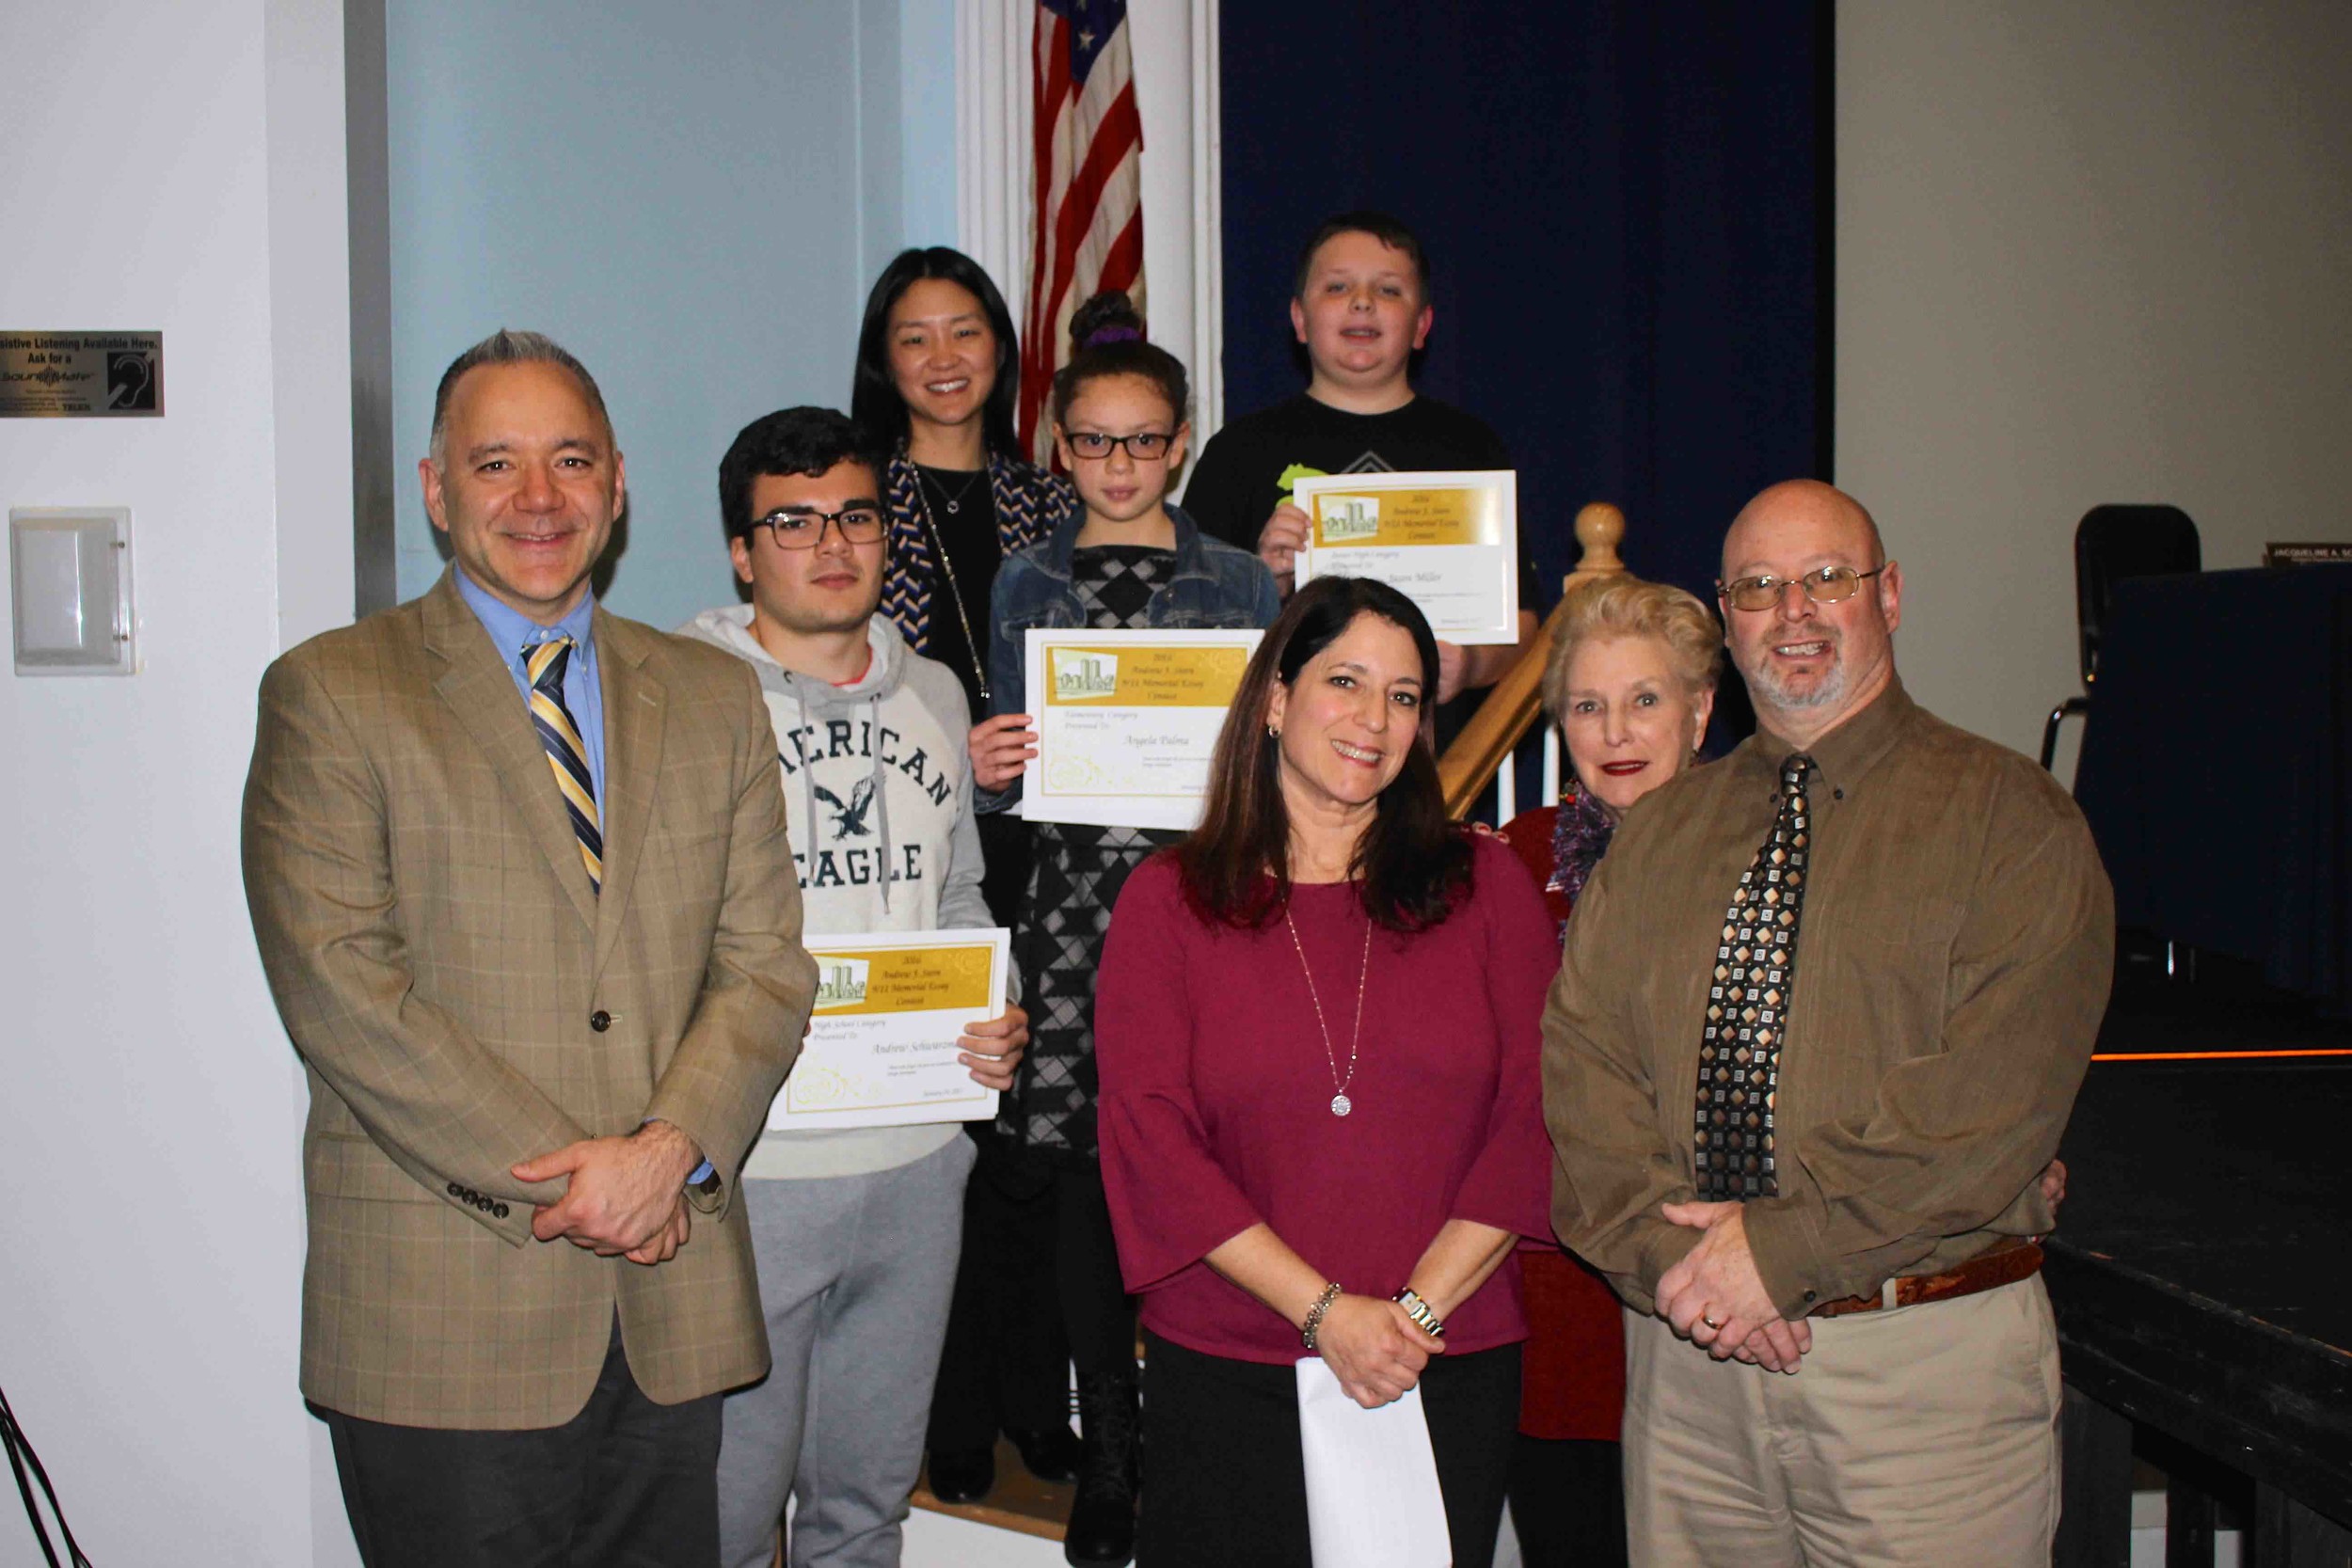 Andrew Stern Memorial Essay Contest winners Andrew Schwarzman, second from left, Jason Miller, center, and Angelina Palma , fourth from left, were honored by East Rockaway Junior-Senior High School Principal Joseph Spero, Centre Avenue School Principal Sherry Ma and members of the Stern family.